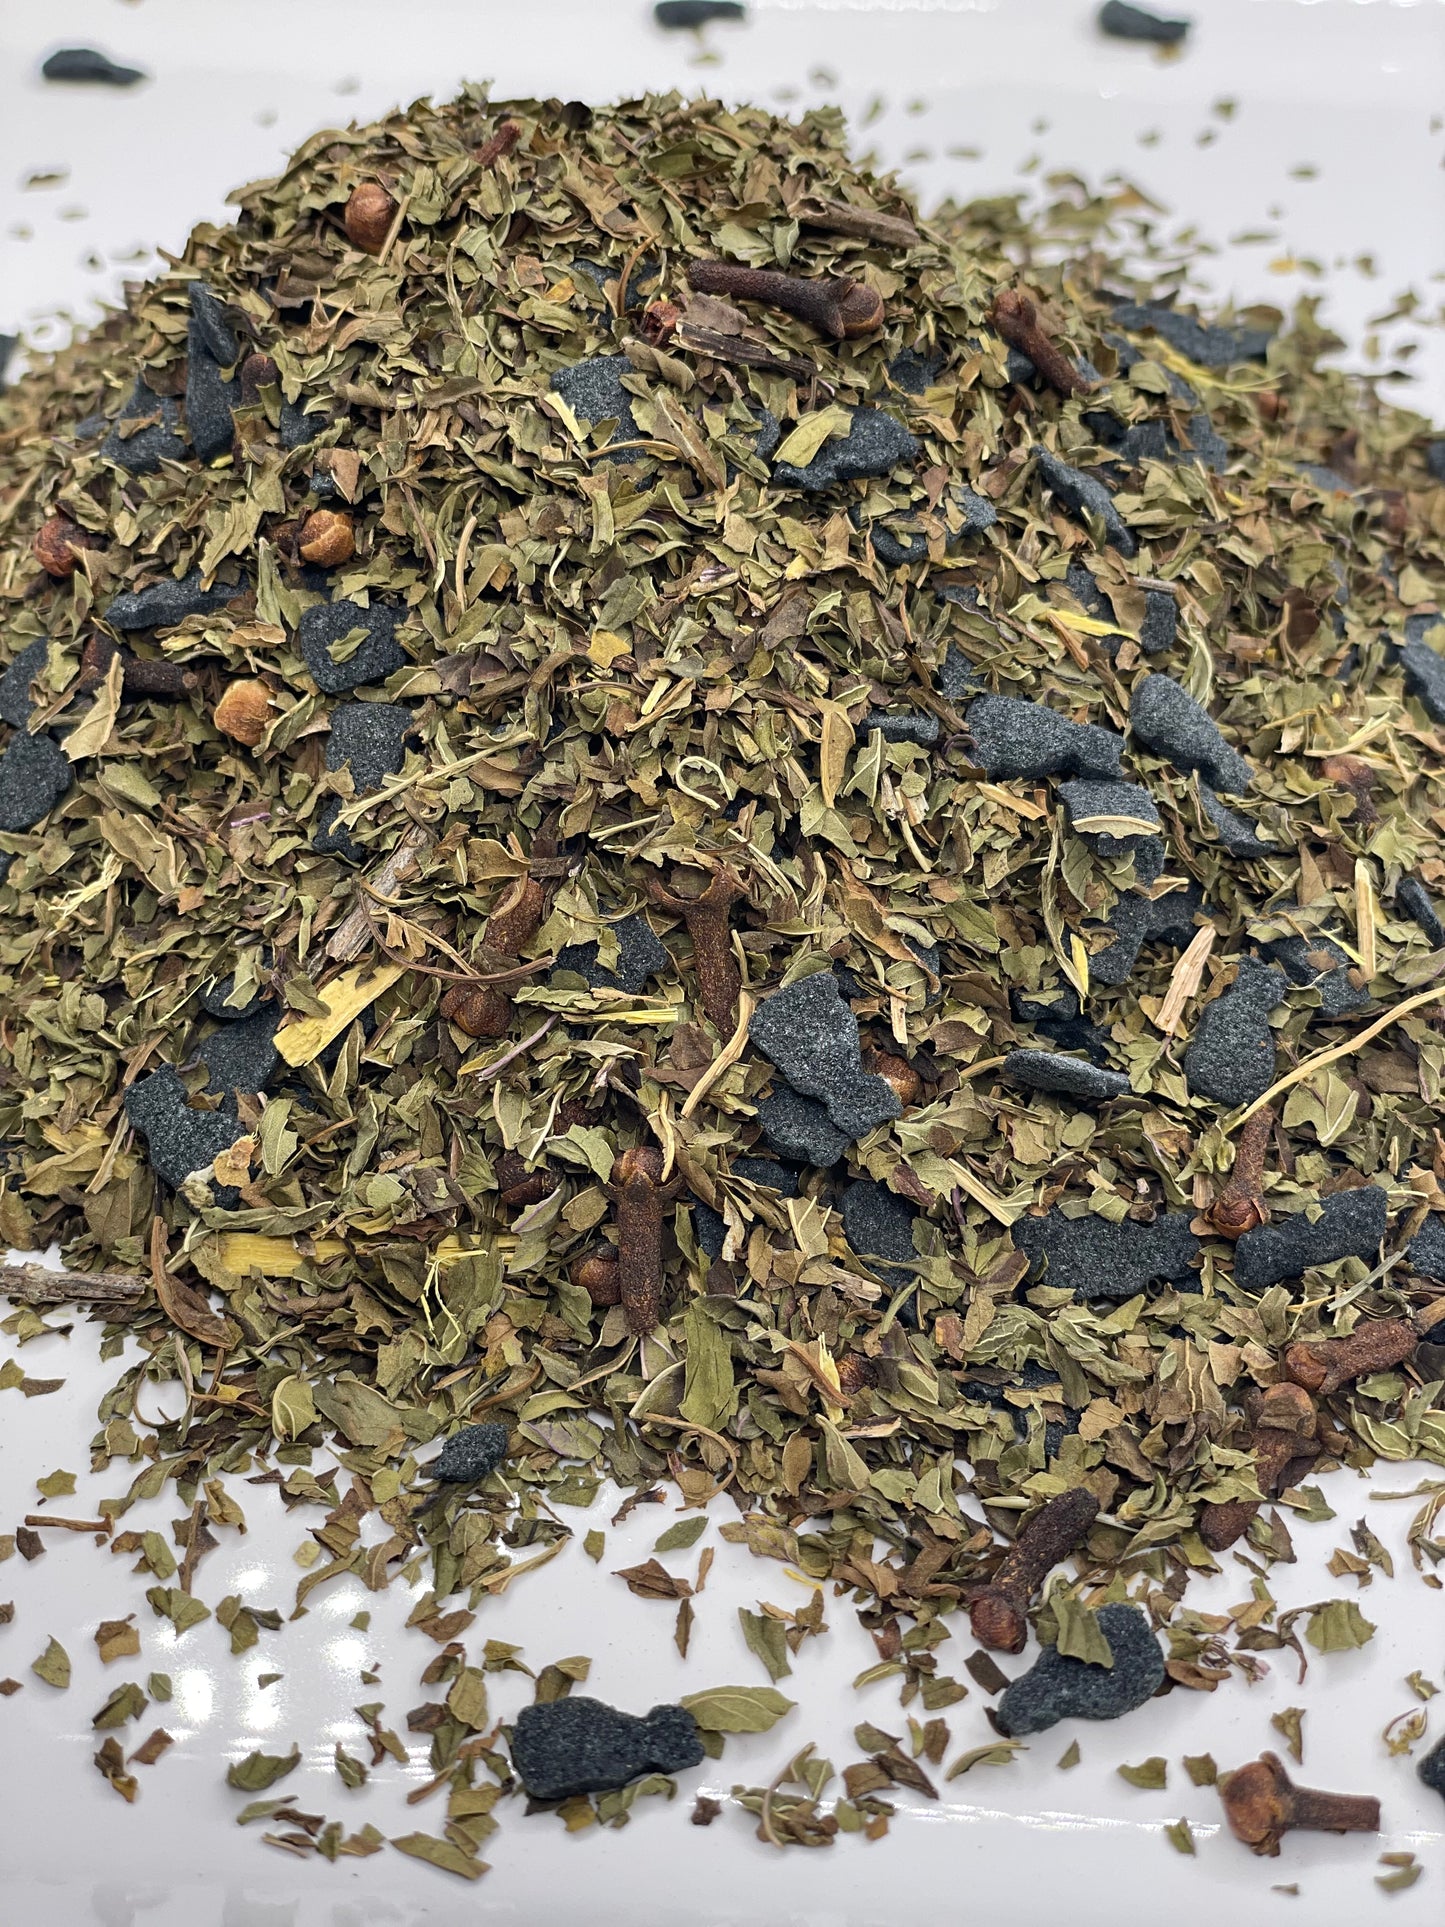 Put A Spell On You Loose Leaf Licorice Peppermint Herbal Tea with Candy Black Cats, Caffeine Free